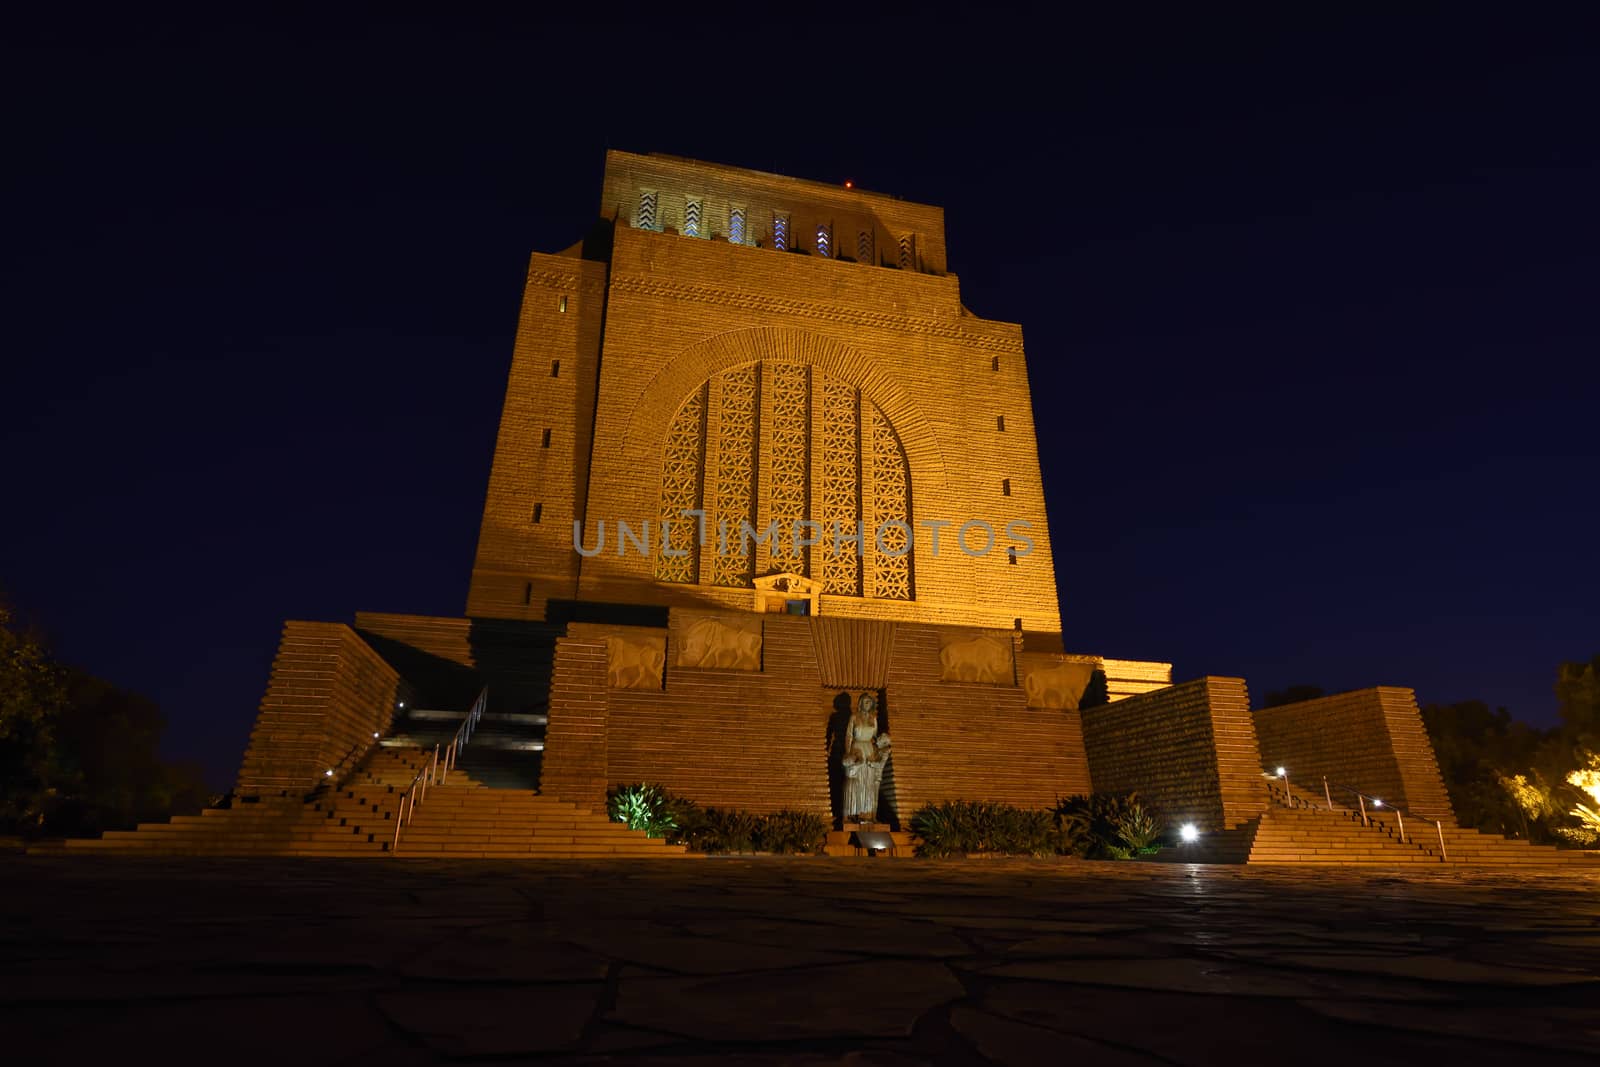 The Voortrekker Monument freedom war memorial national heritage site commemorating the struggle and sacrifice of the South African republican settler population during the British oppression and anglo-boer war, Pretoria, South Africa